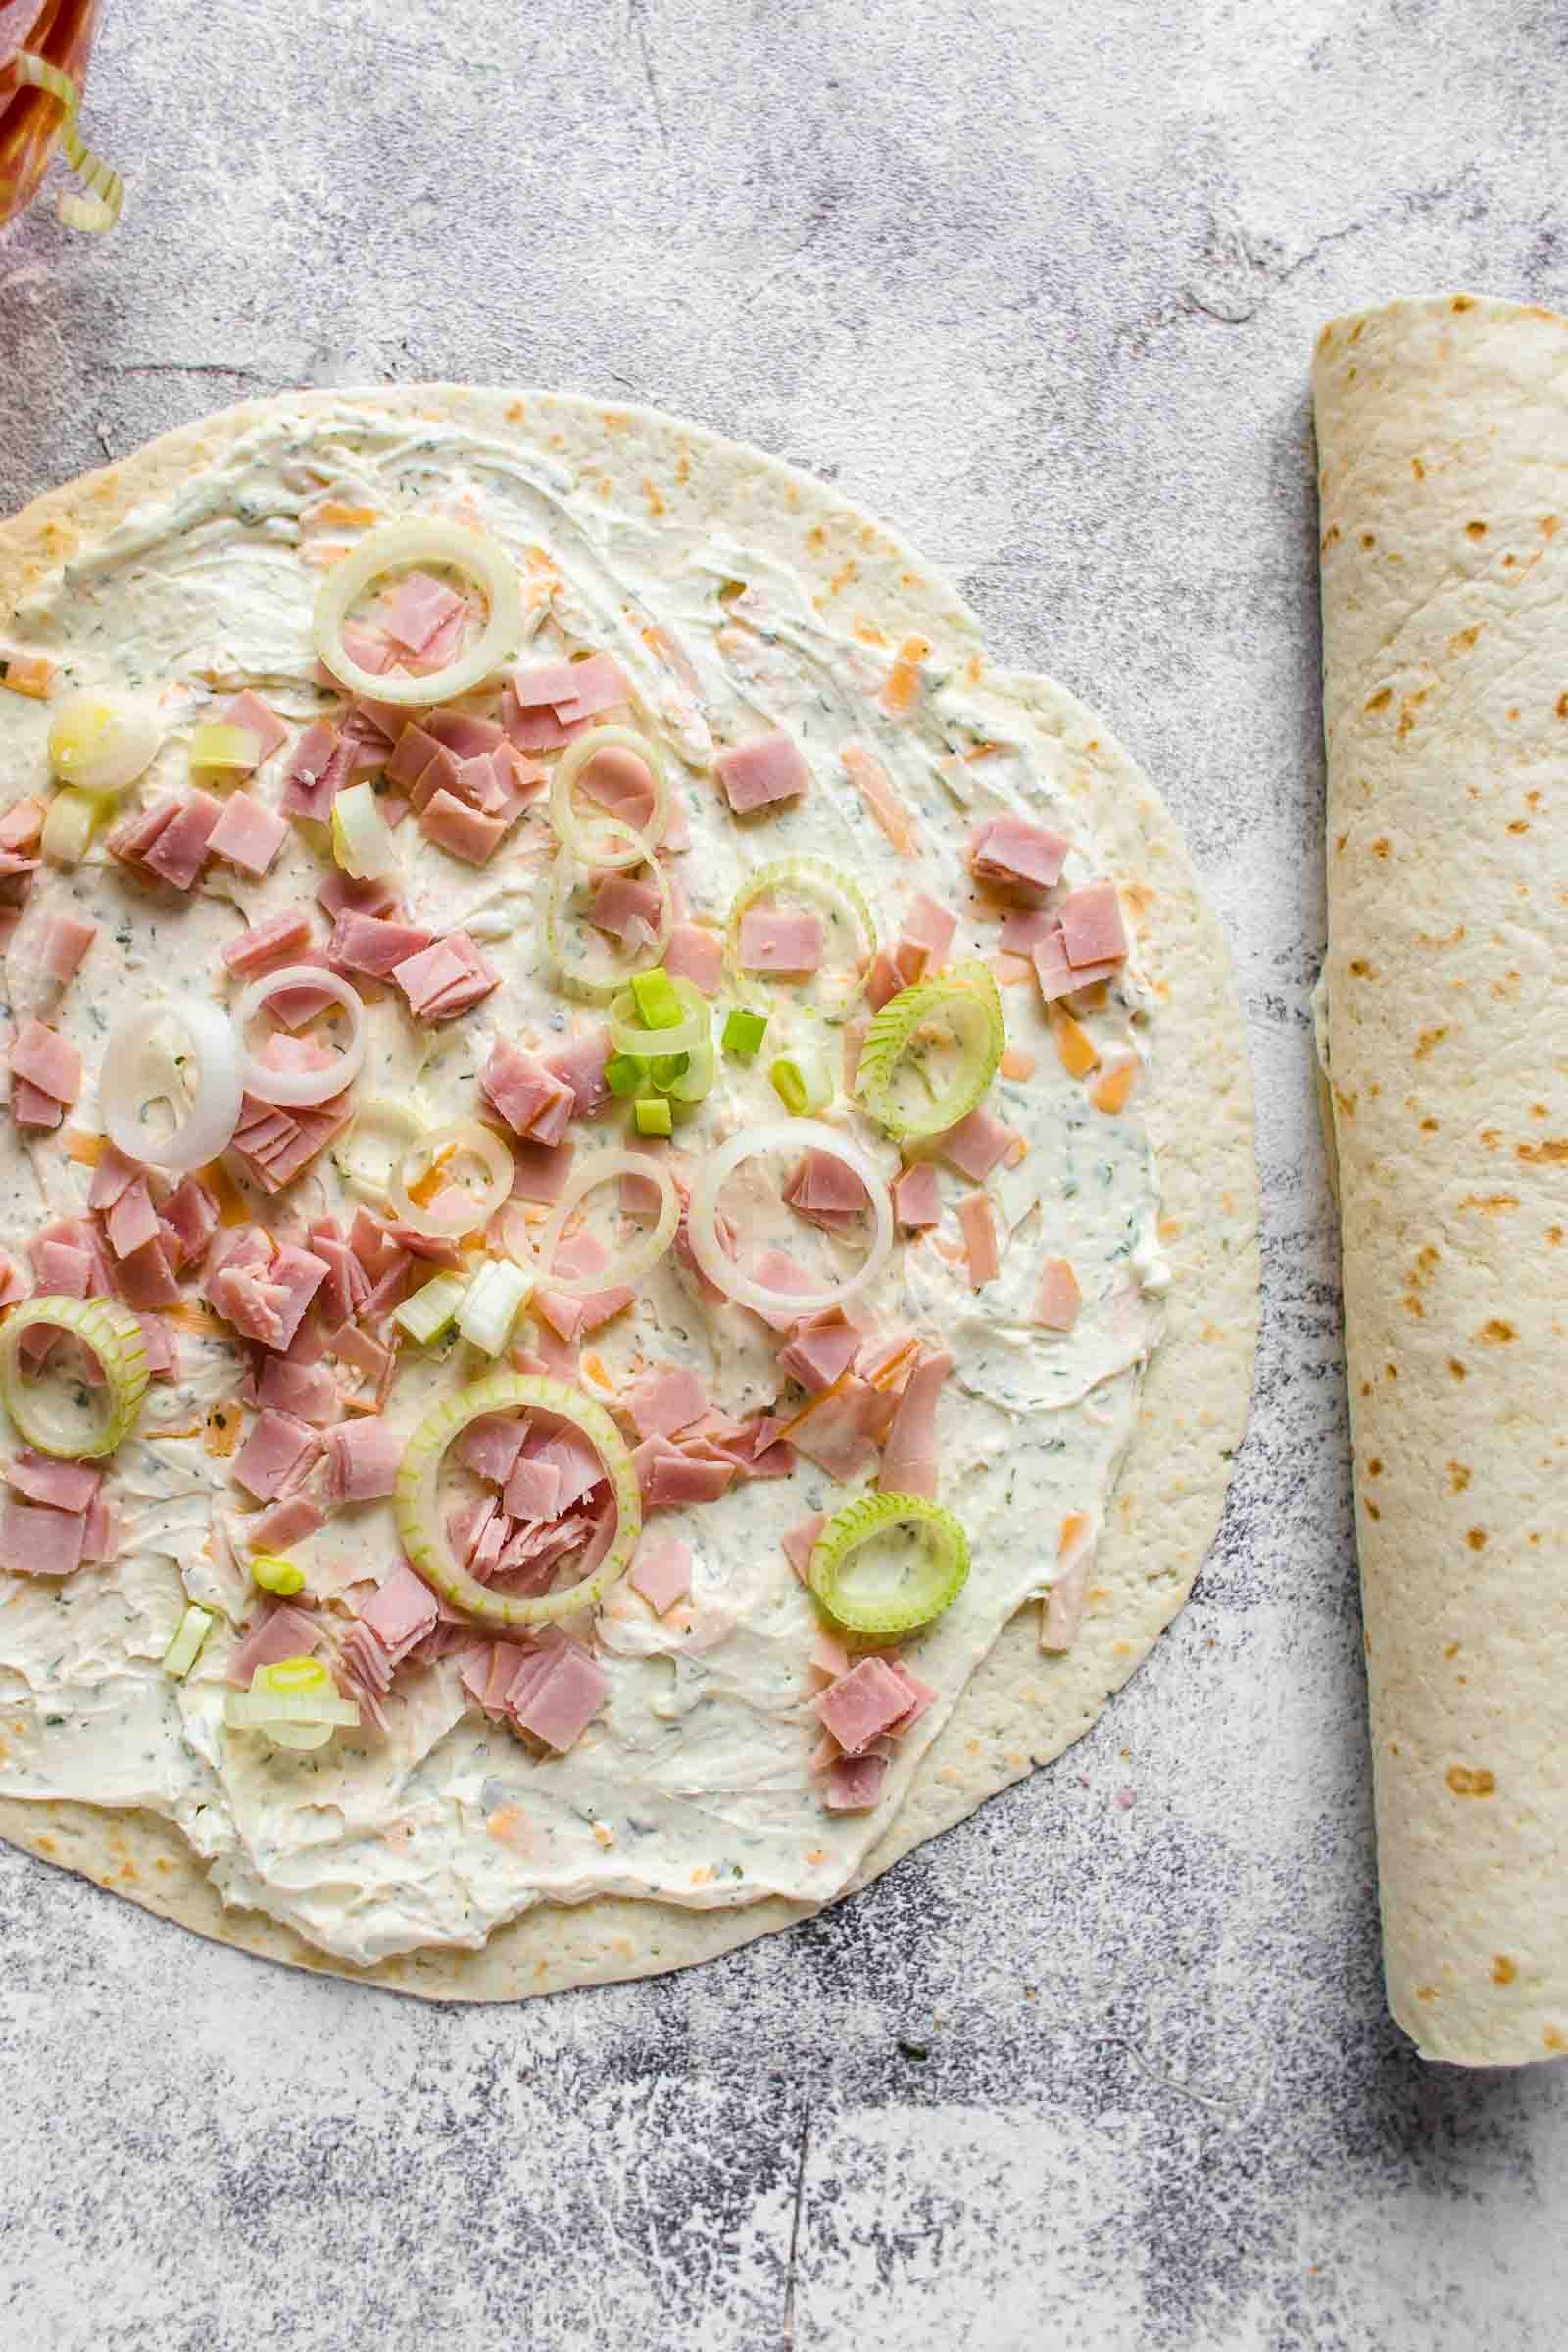 a tortilla covered in the ingredients used to make the roll up